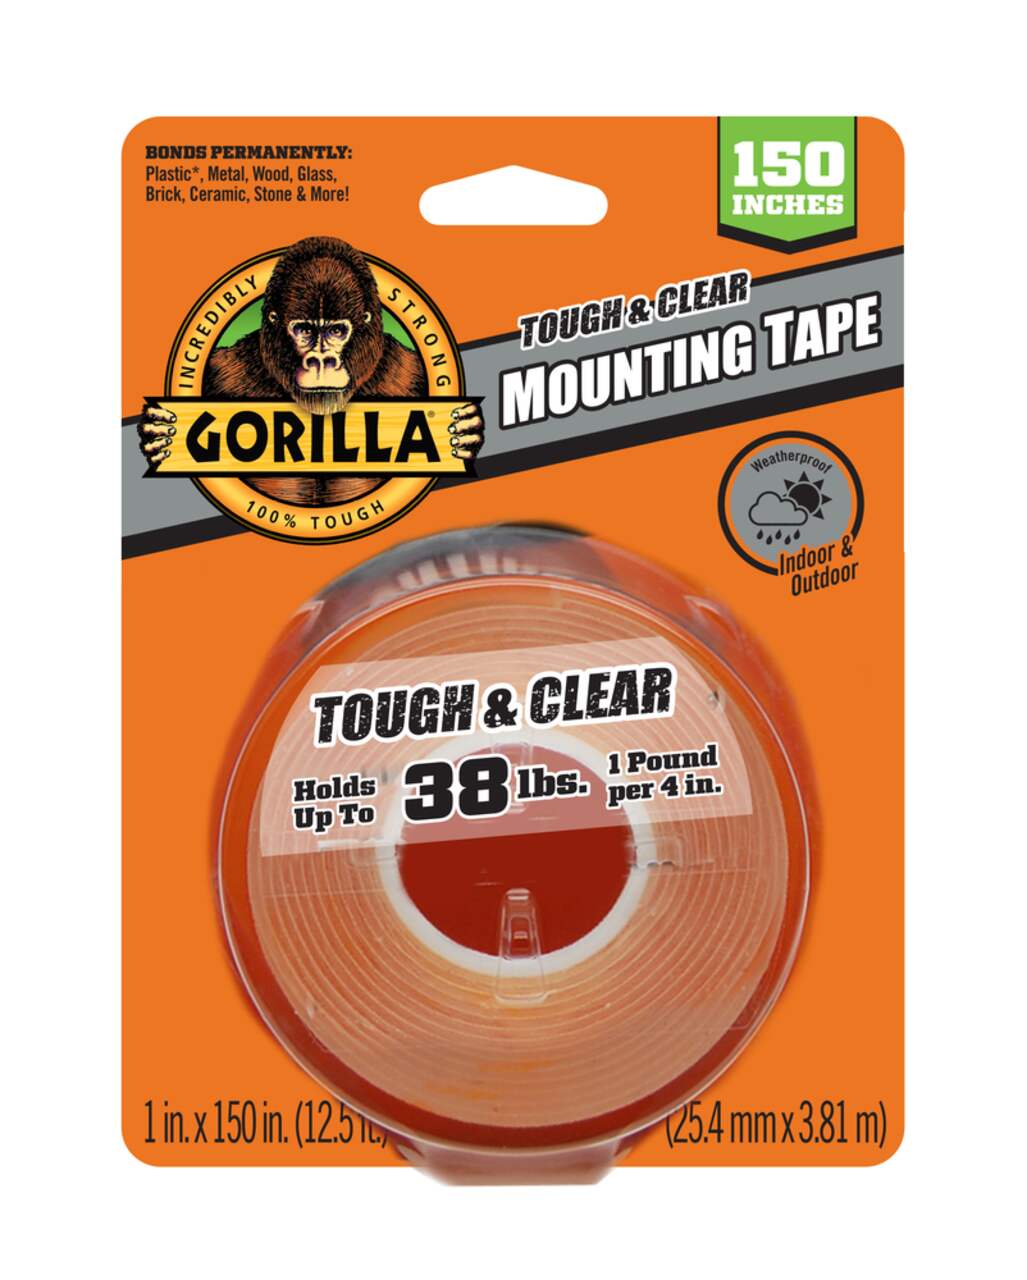 Krazy Tape Strong Bond Mounting Tape Heavy Duty Double Sided Tape